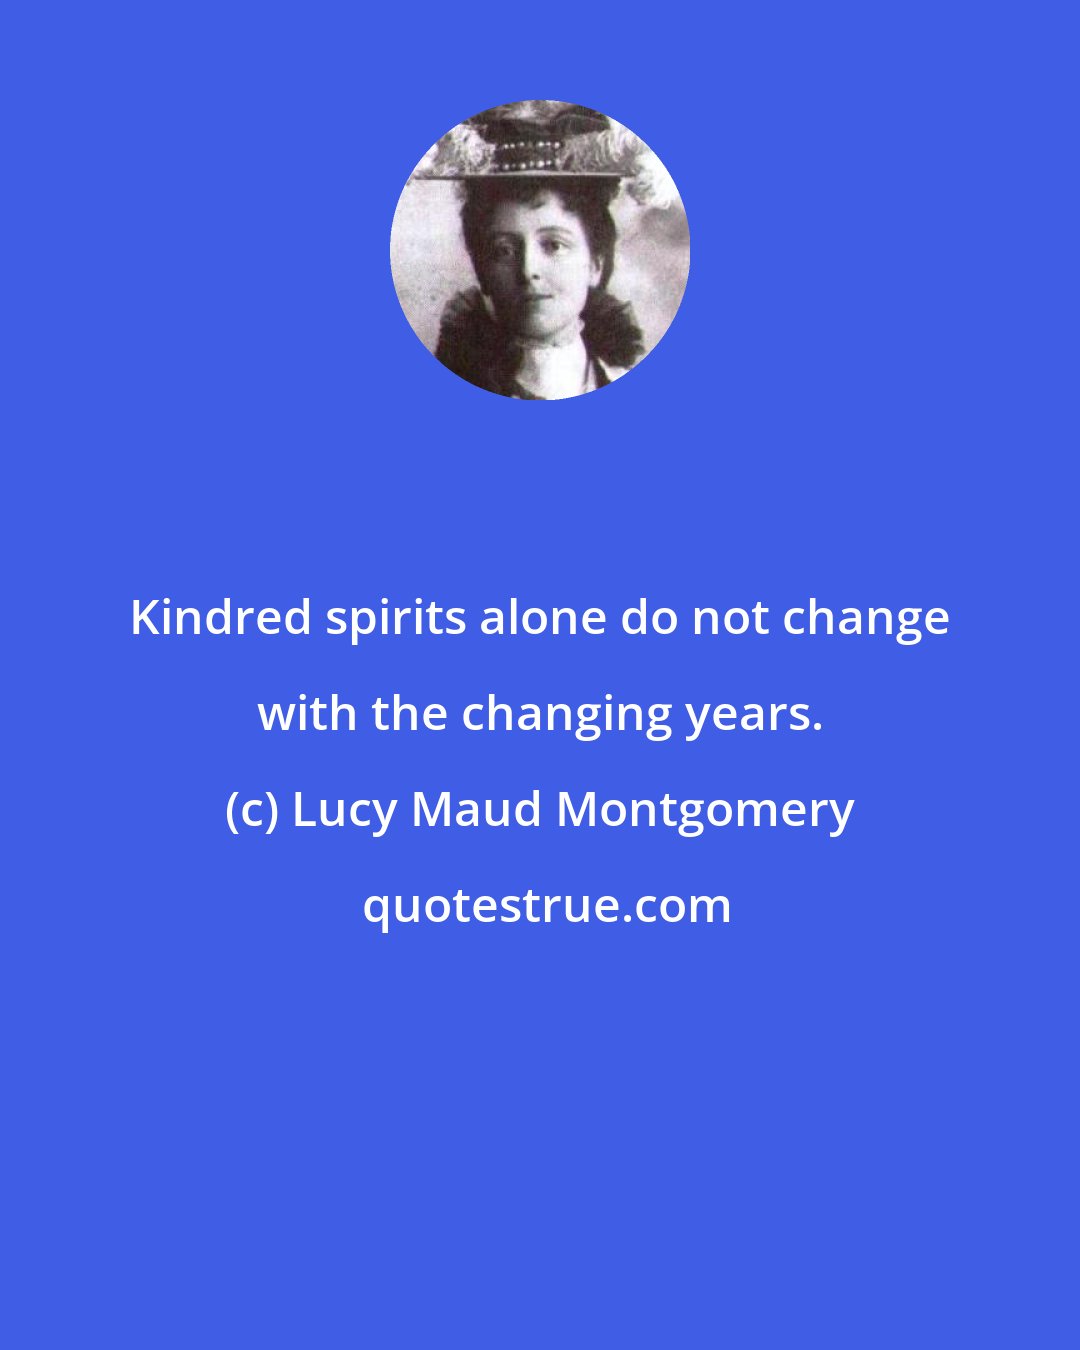 Lucy Maud Montgomery: Kindred spirits alone do not change with the changing years.